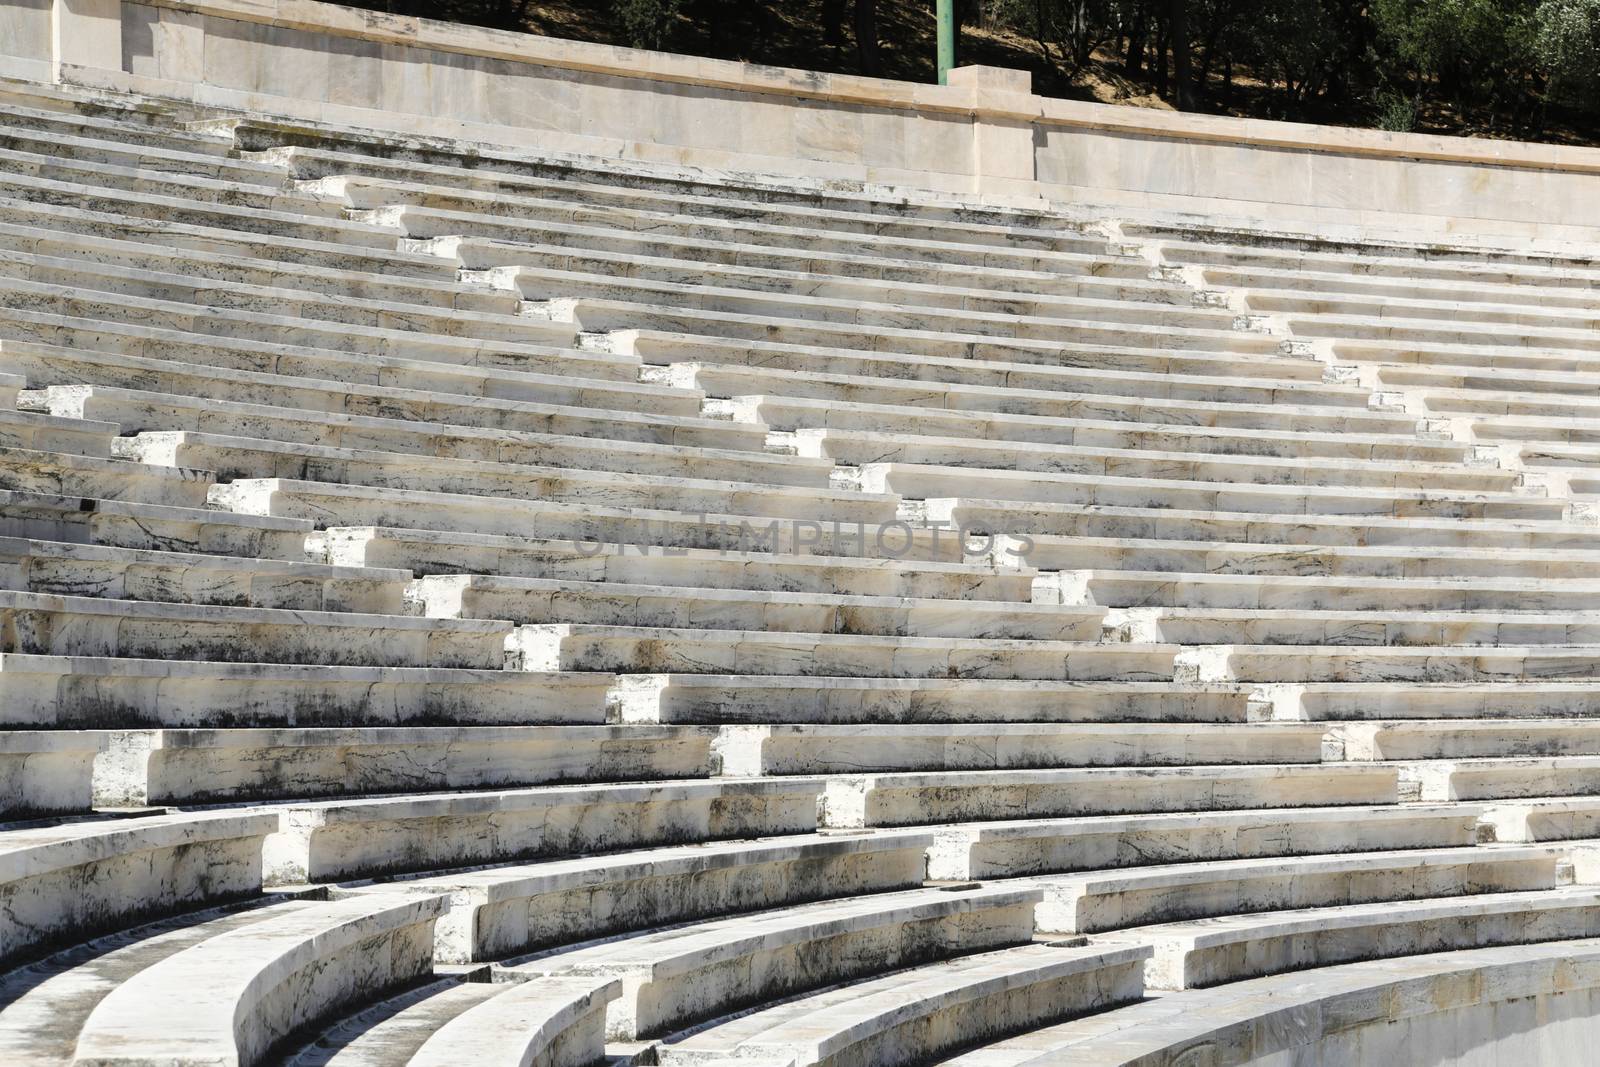 The Panathenaic stadium or kallimarmaro in Athens hosted the first modern Olympic Games in 1896